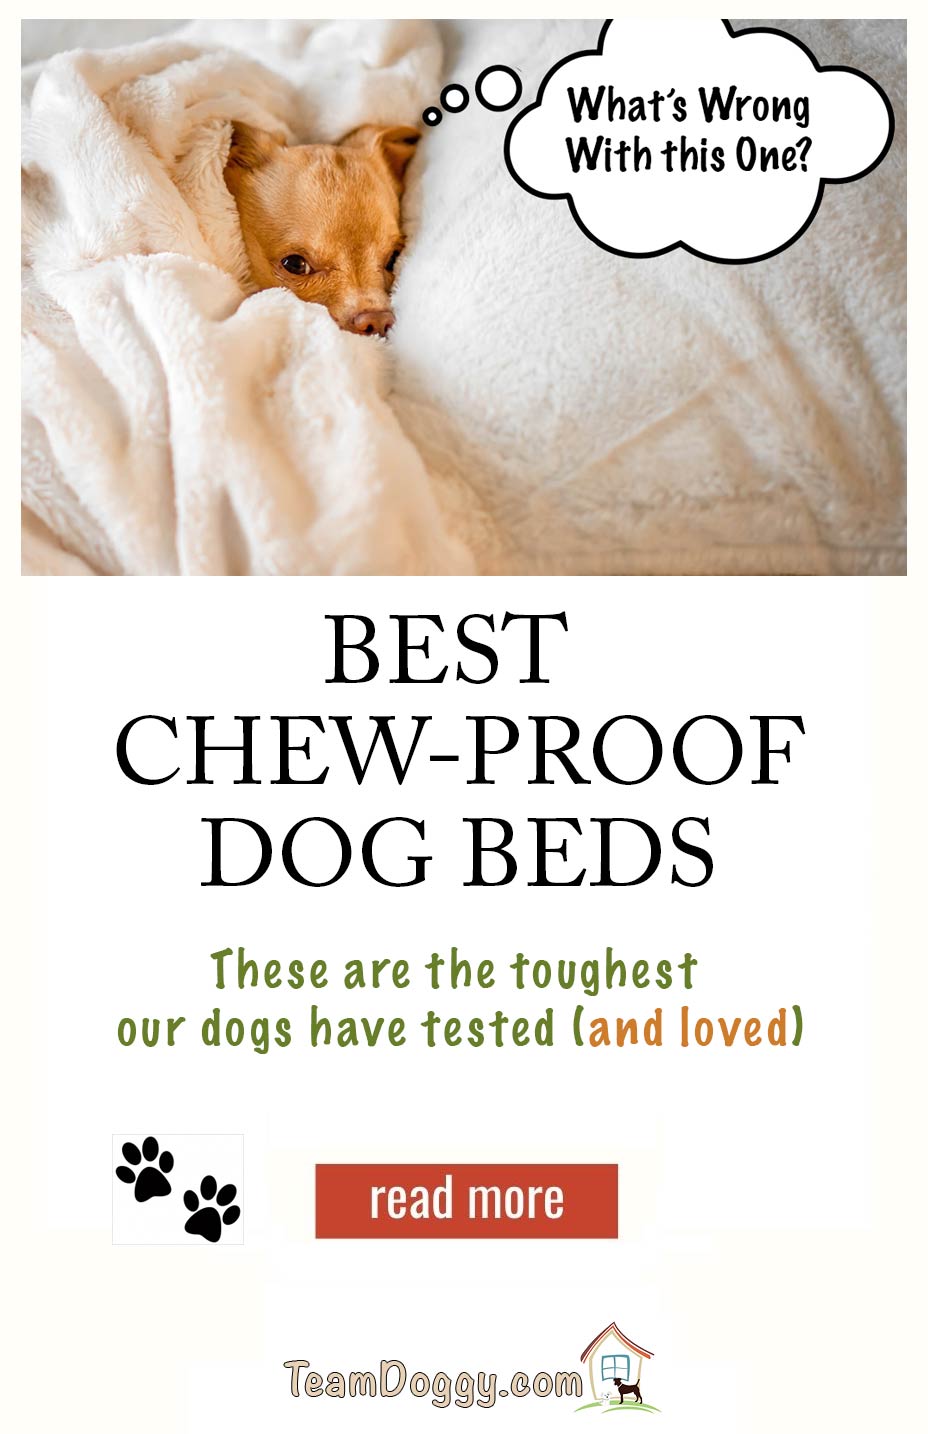 best chew-proof dog beds for chewers